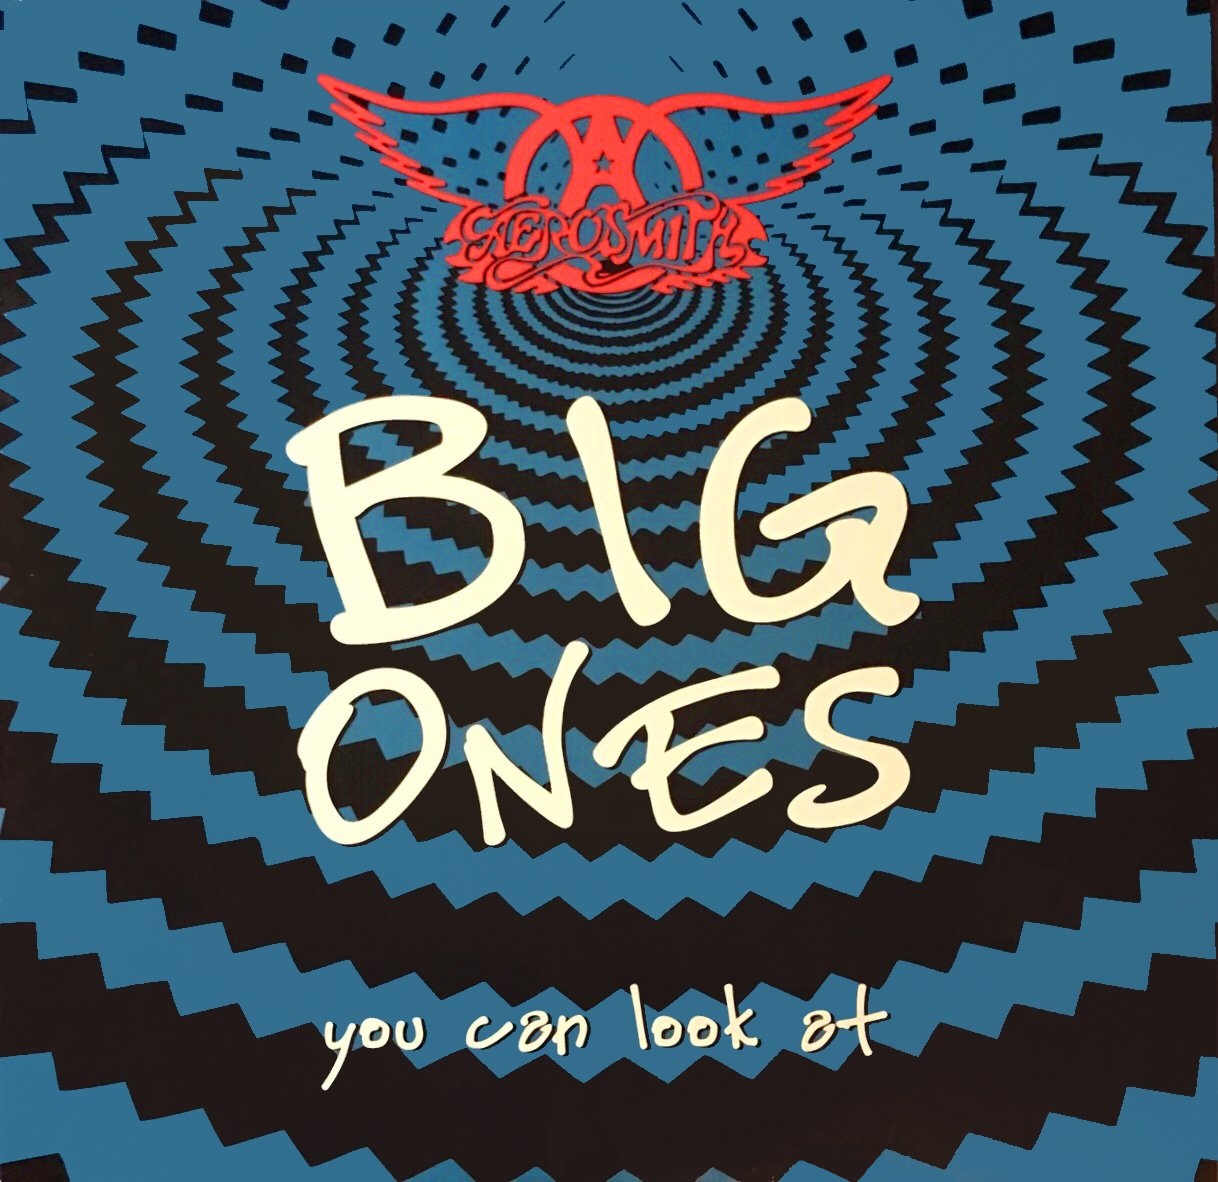 Cover - Aerosmith - Big Ones You Can Look At.jpg